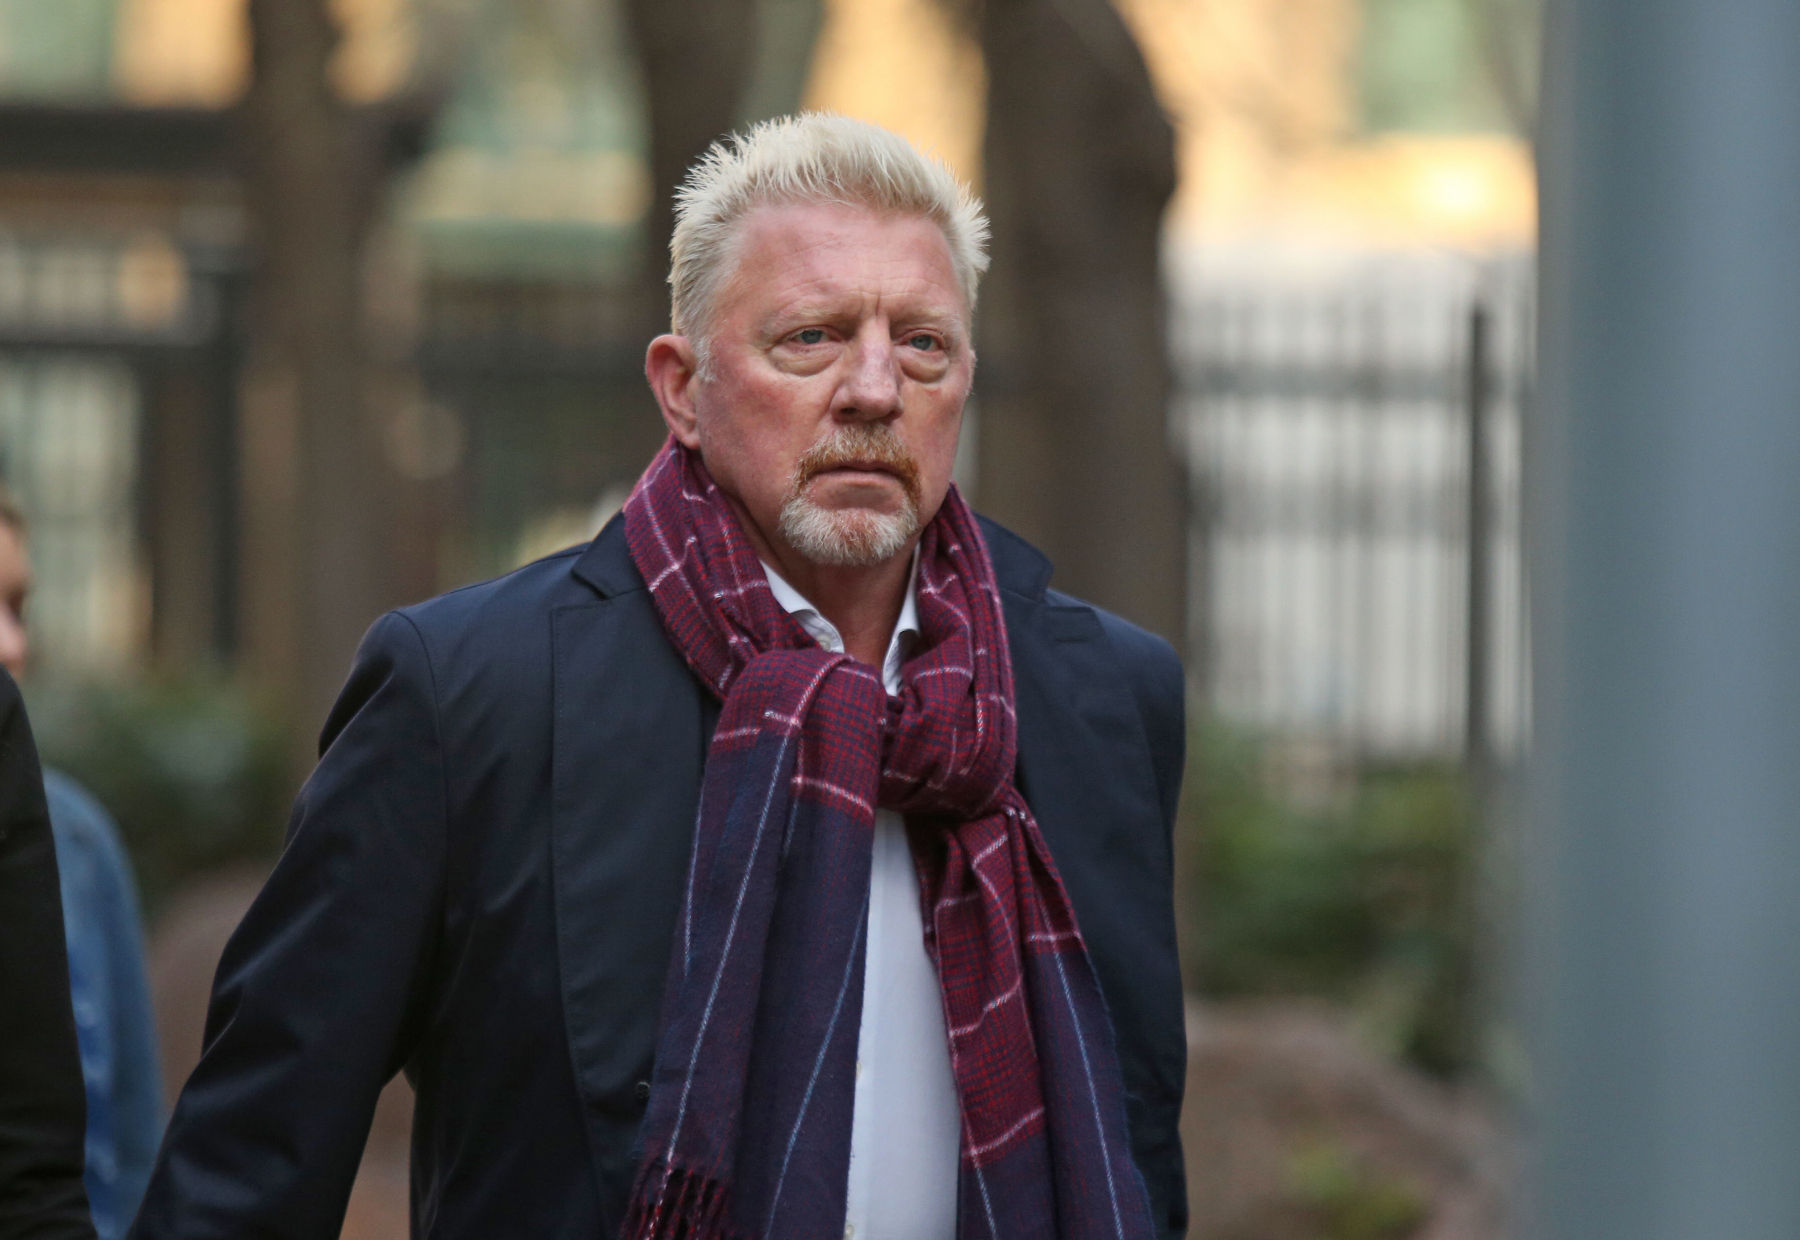 Boris Becker bankruptcy trial to resume: All you need to know about the case